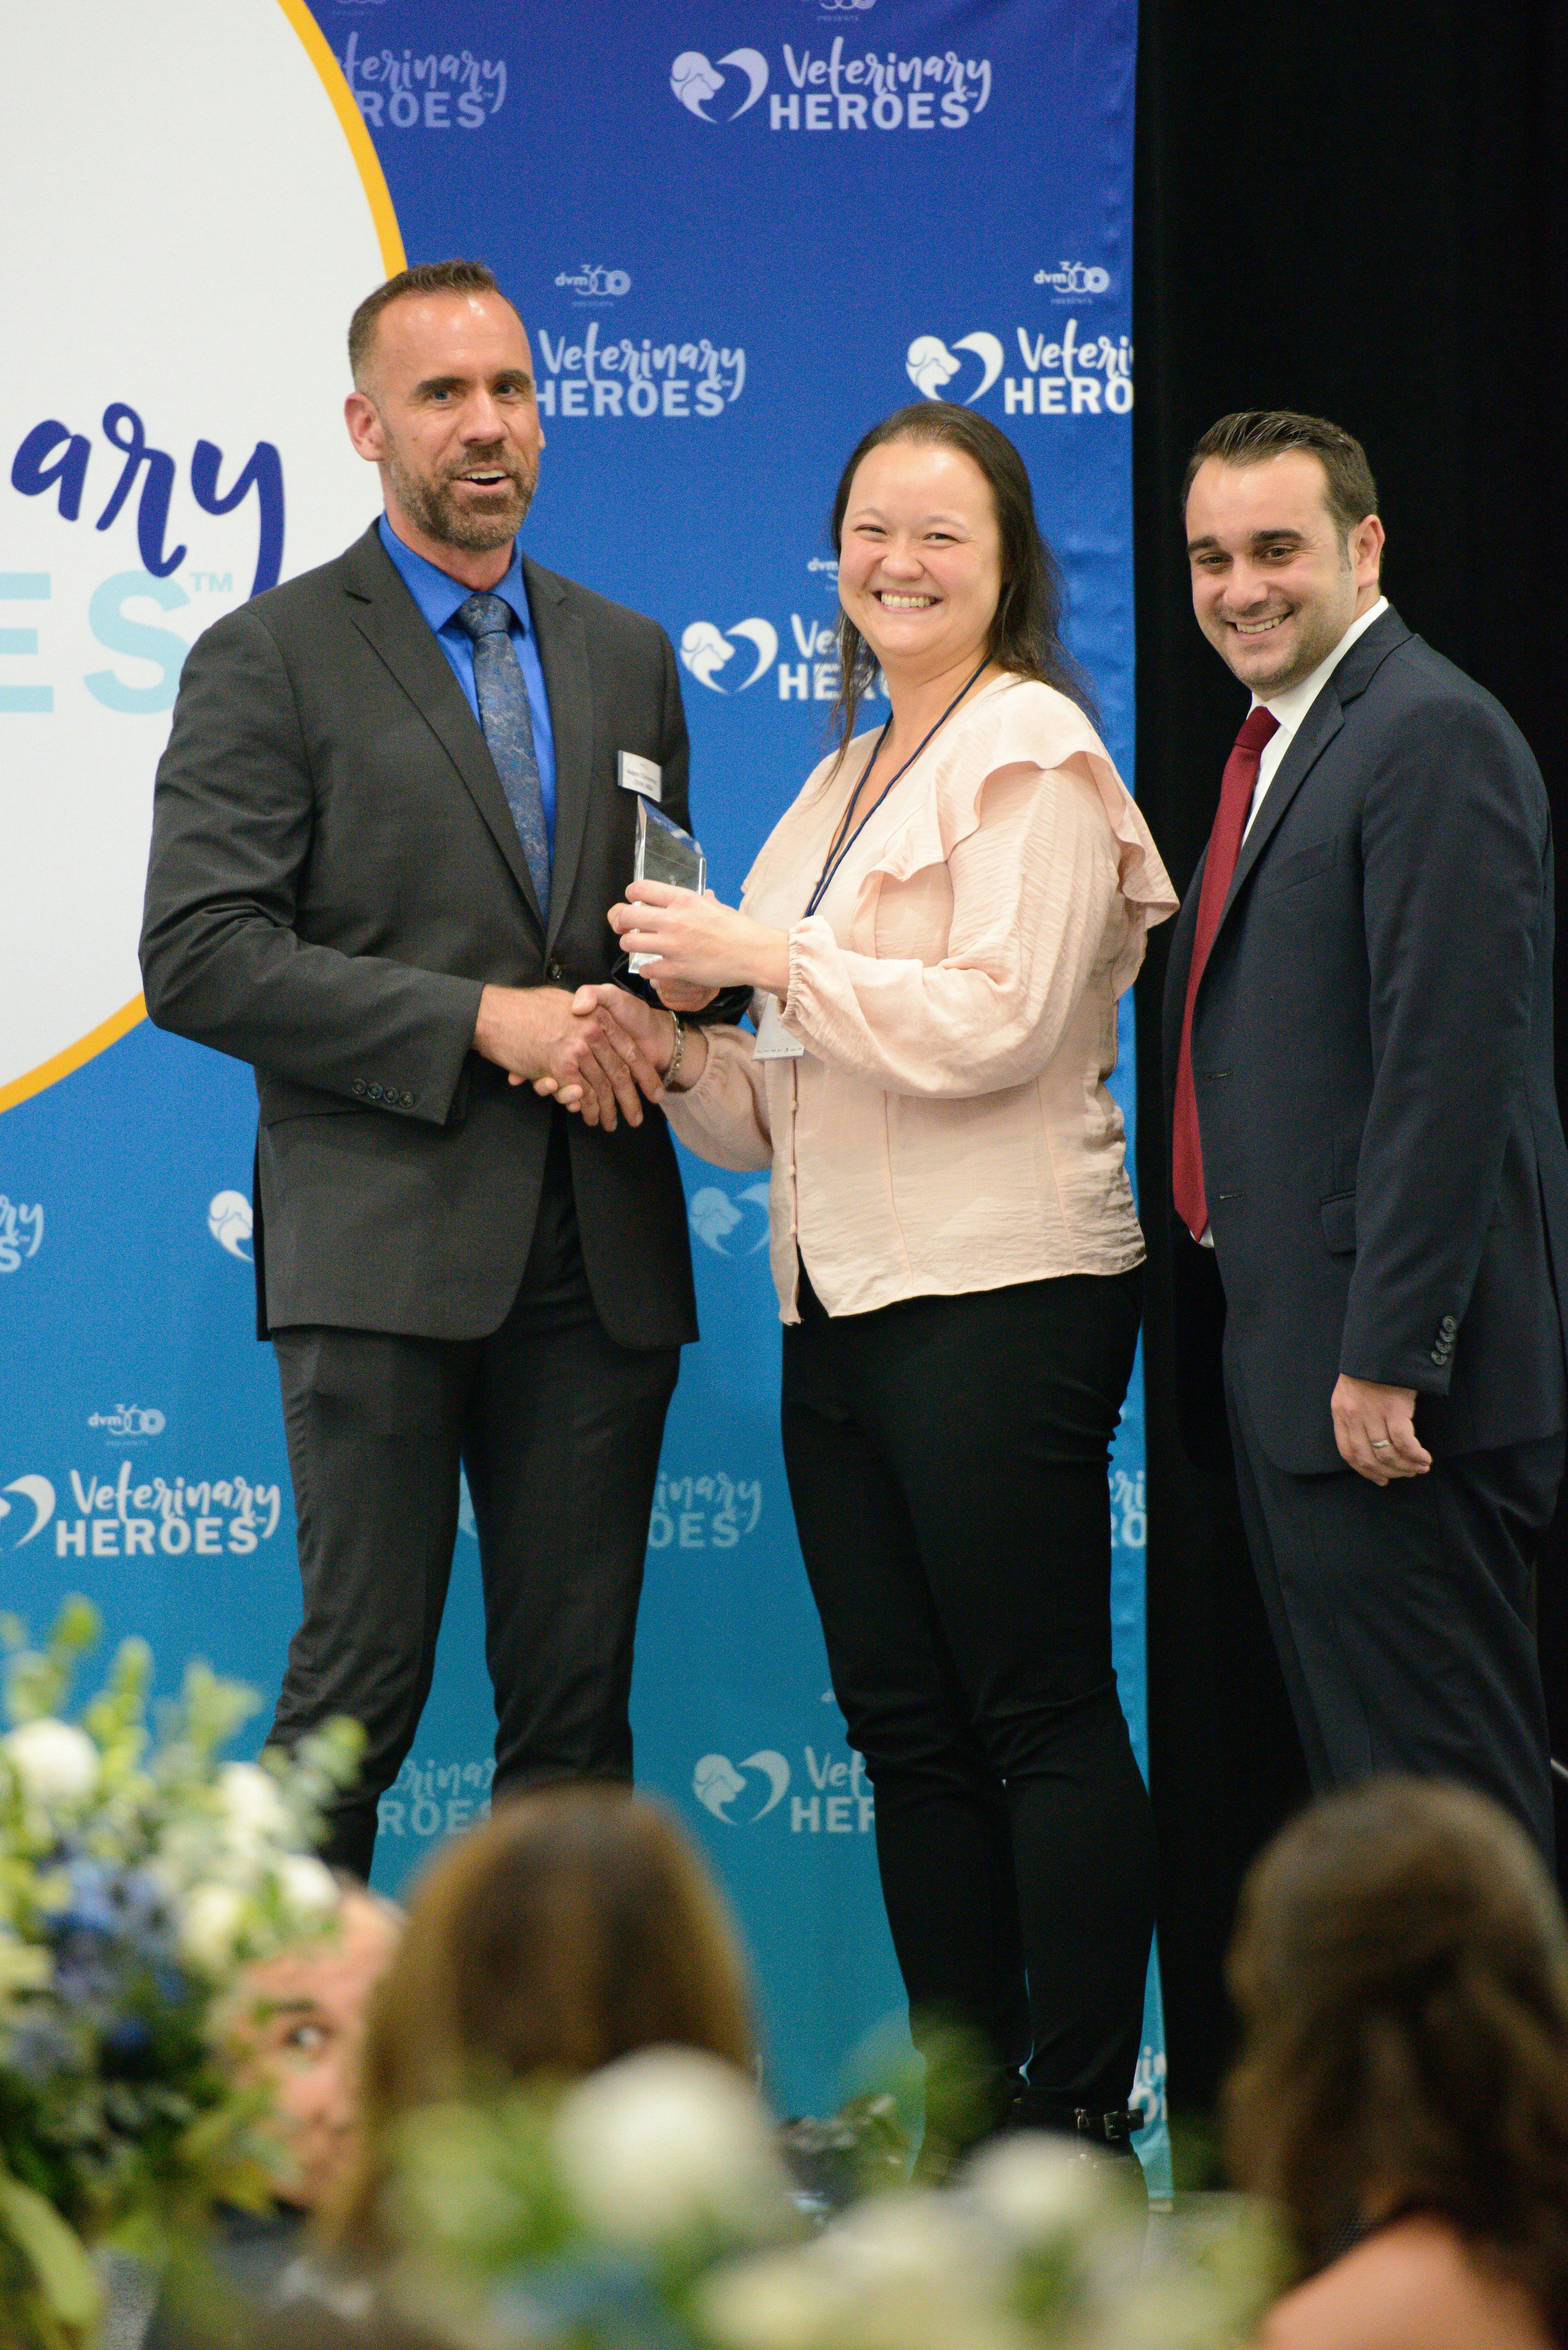 Photo: Jeeheon Cho Photography

Susie Martin (center) receives the Veterinary HeroesTM award for Client Service Representation from (left) Adam Christman, DVM, MBA, chief veterinary officer for dvm360®, and John Hydrusko, vice president, MultiMedia Animal Care LLC at MJH Life SciencesTM.  